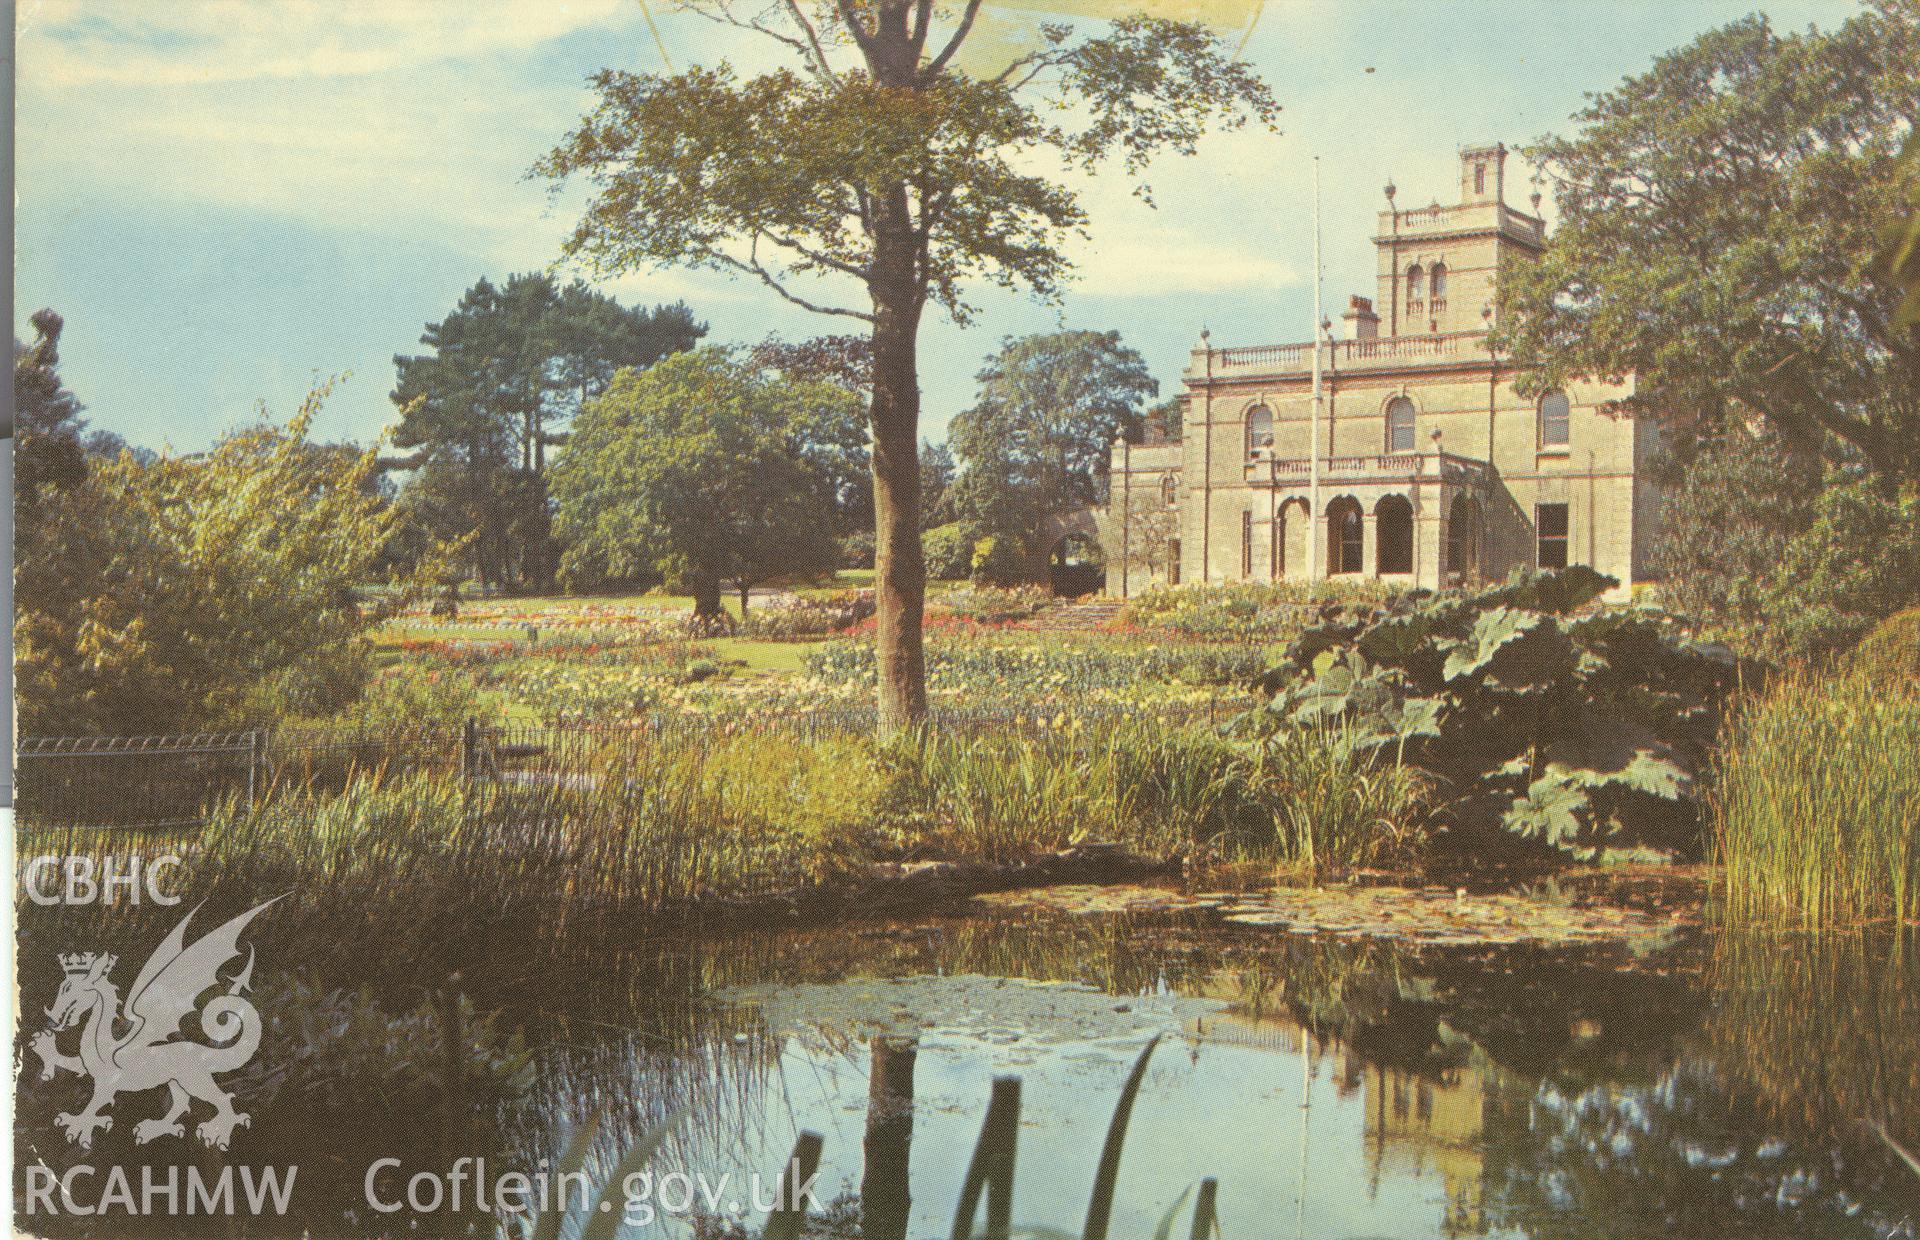 Digitised postcard image of lily pond, gunnera, and flower garden at Parc Howard garden, Llanelli. Produced by Parks and Gardens Data Services, from an original item in the Peter Davis Collection at Parks and Gardens UK. We hold only web-resolution images of this collection, suitable for viewing on screen and for research purposes only. We do not hold the original images, or publication quality scans.